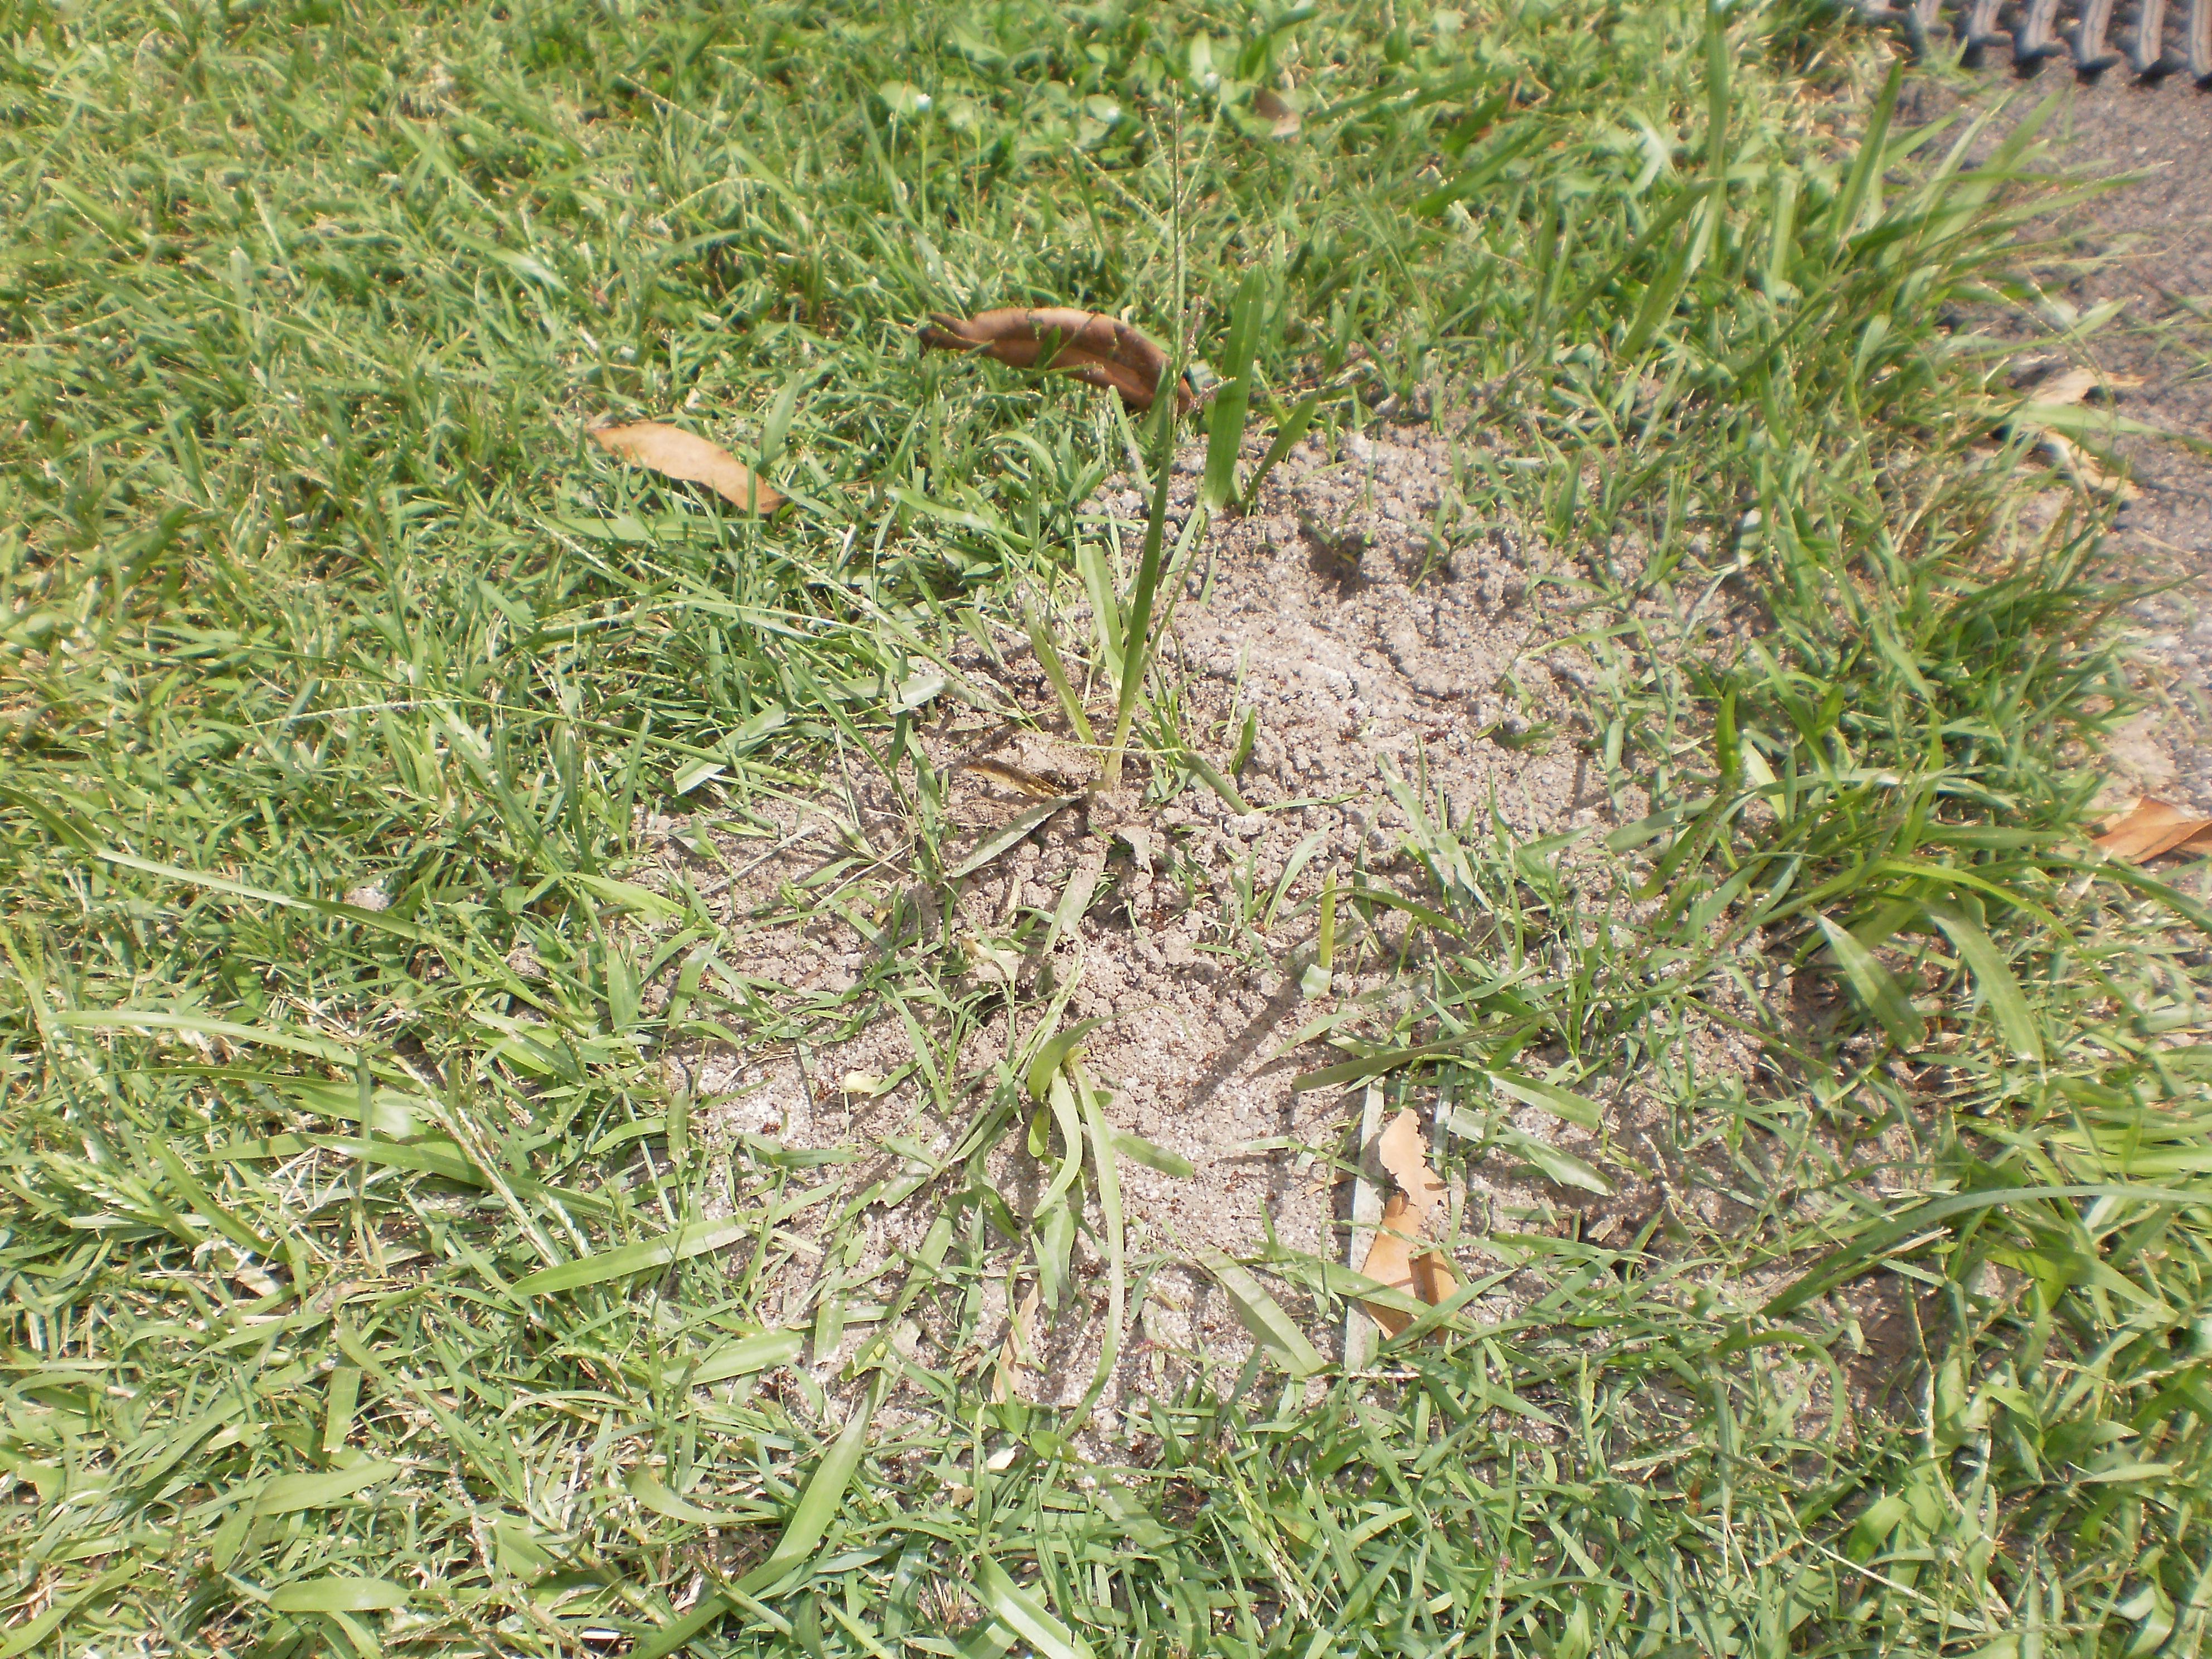 Fire ant nests